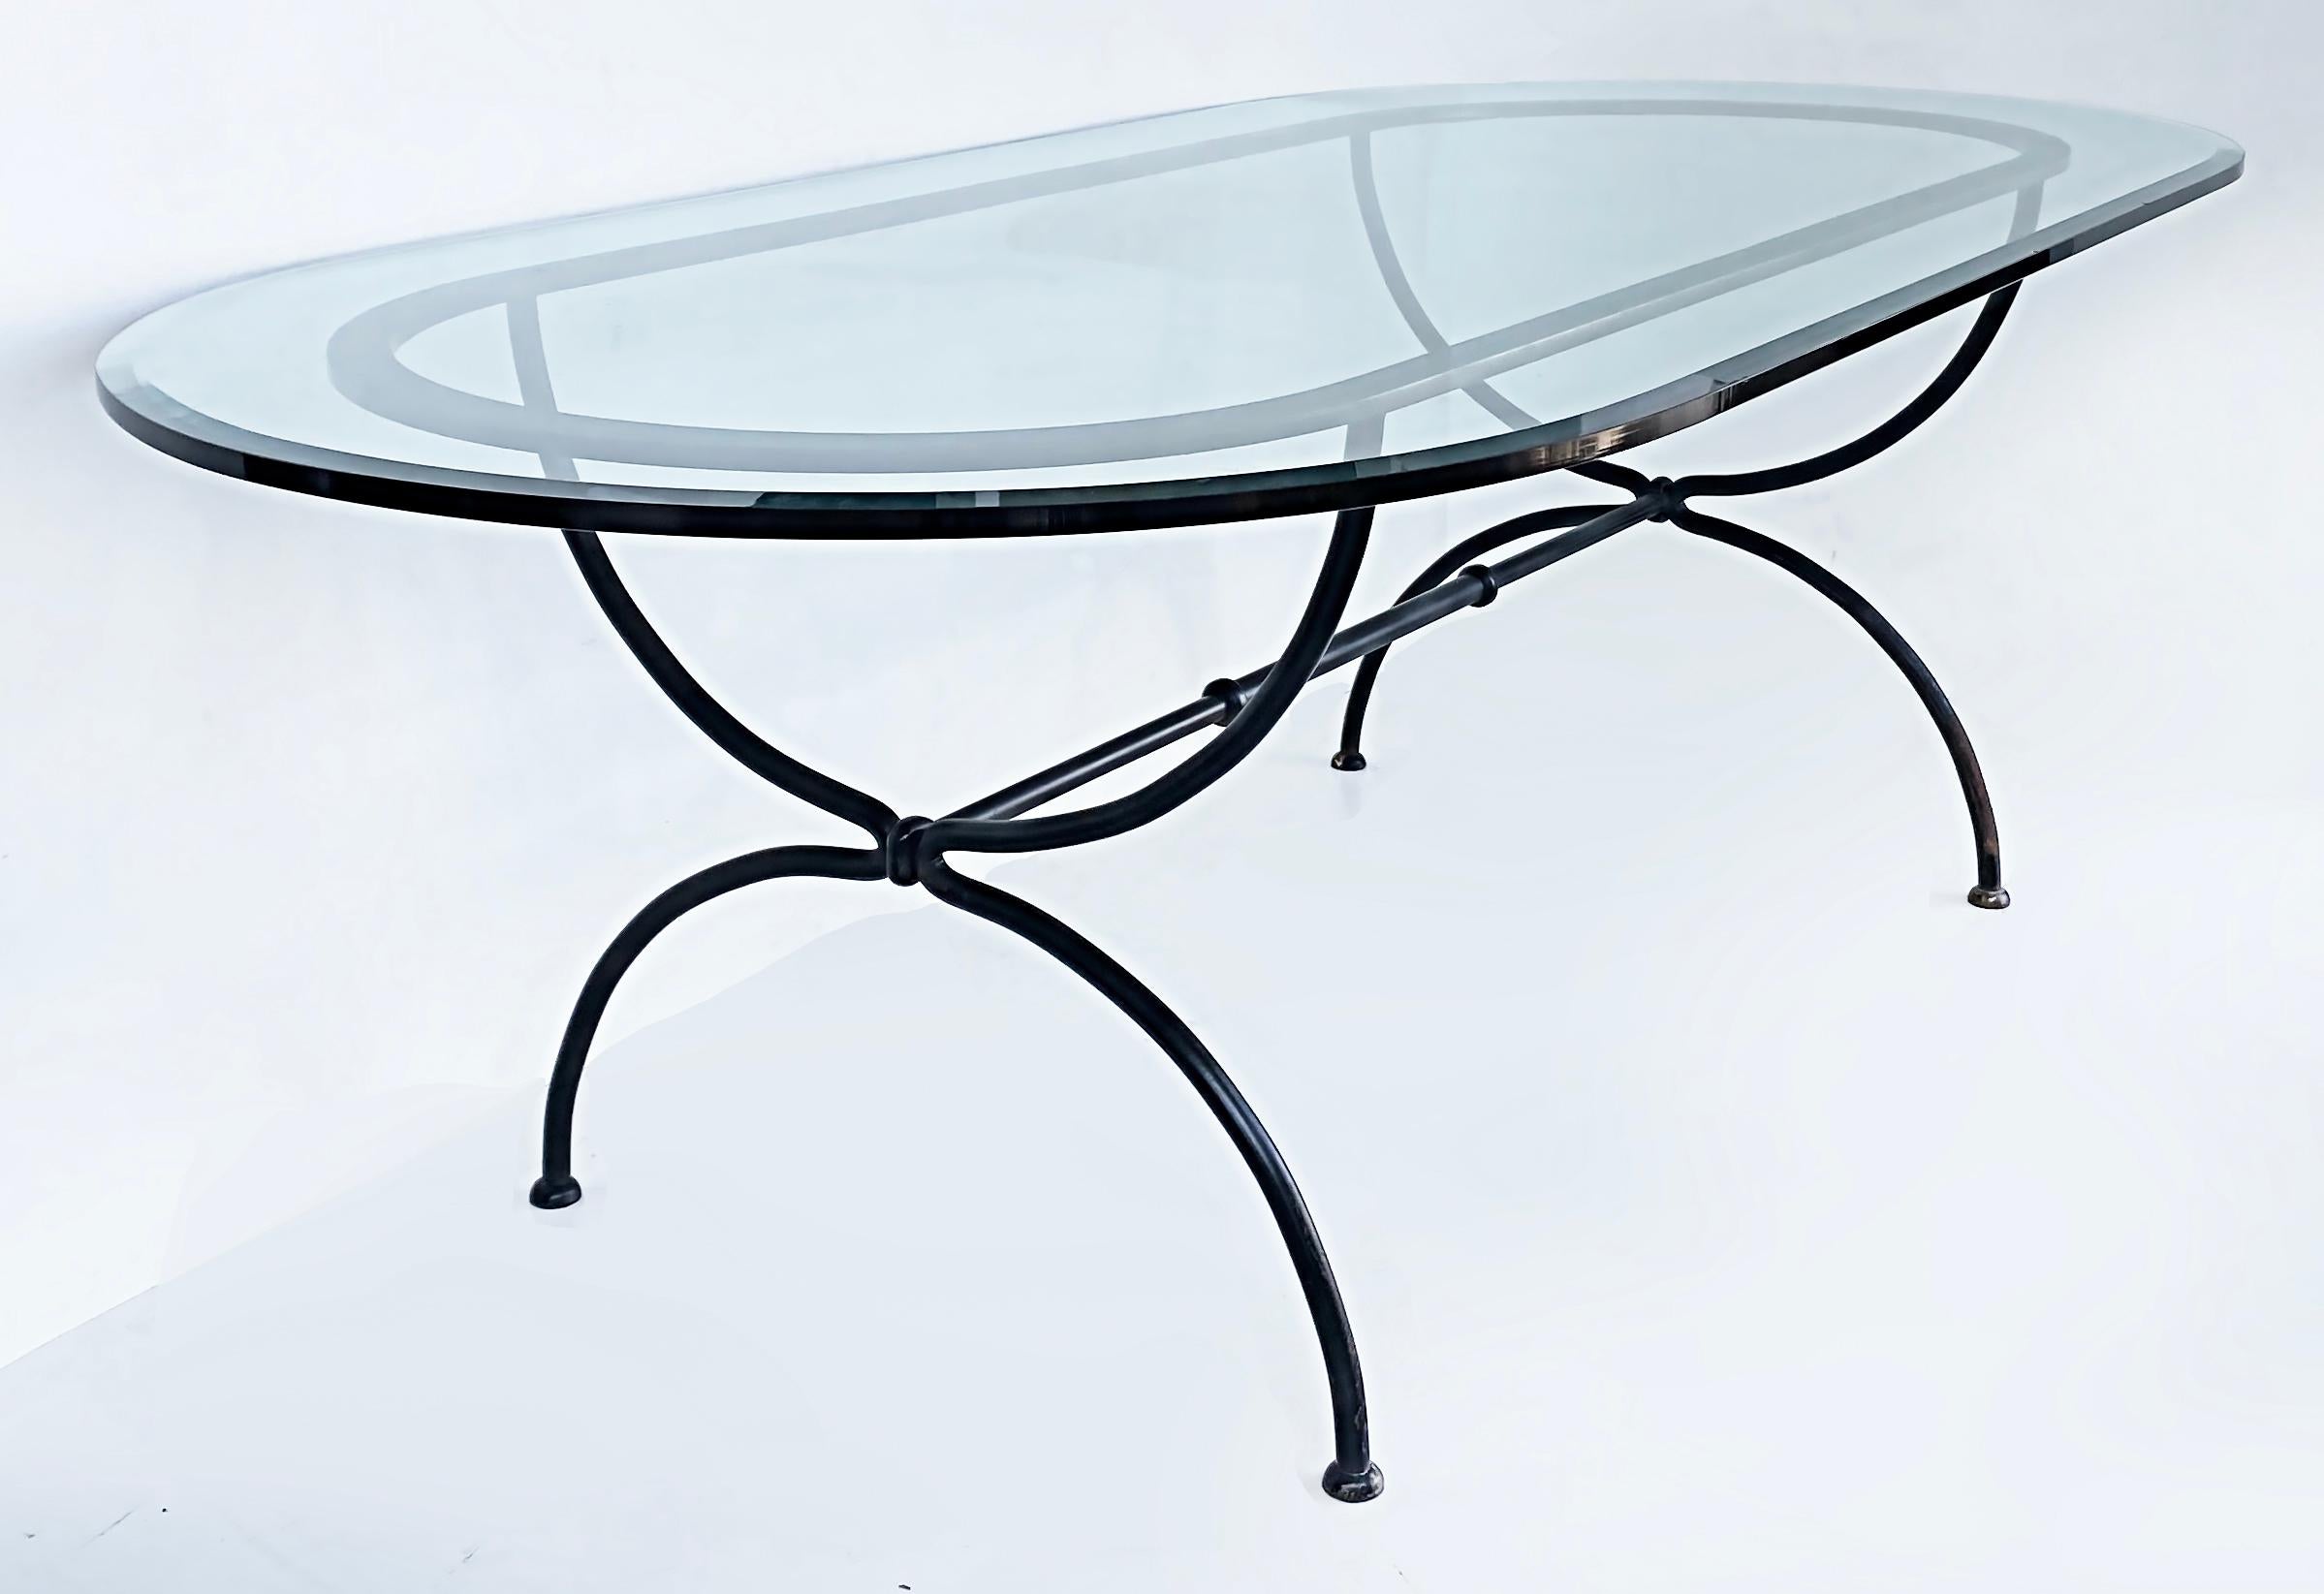 Race-track oval powder-coated wrought iron dining table with 1